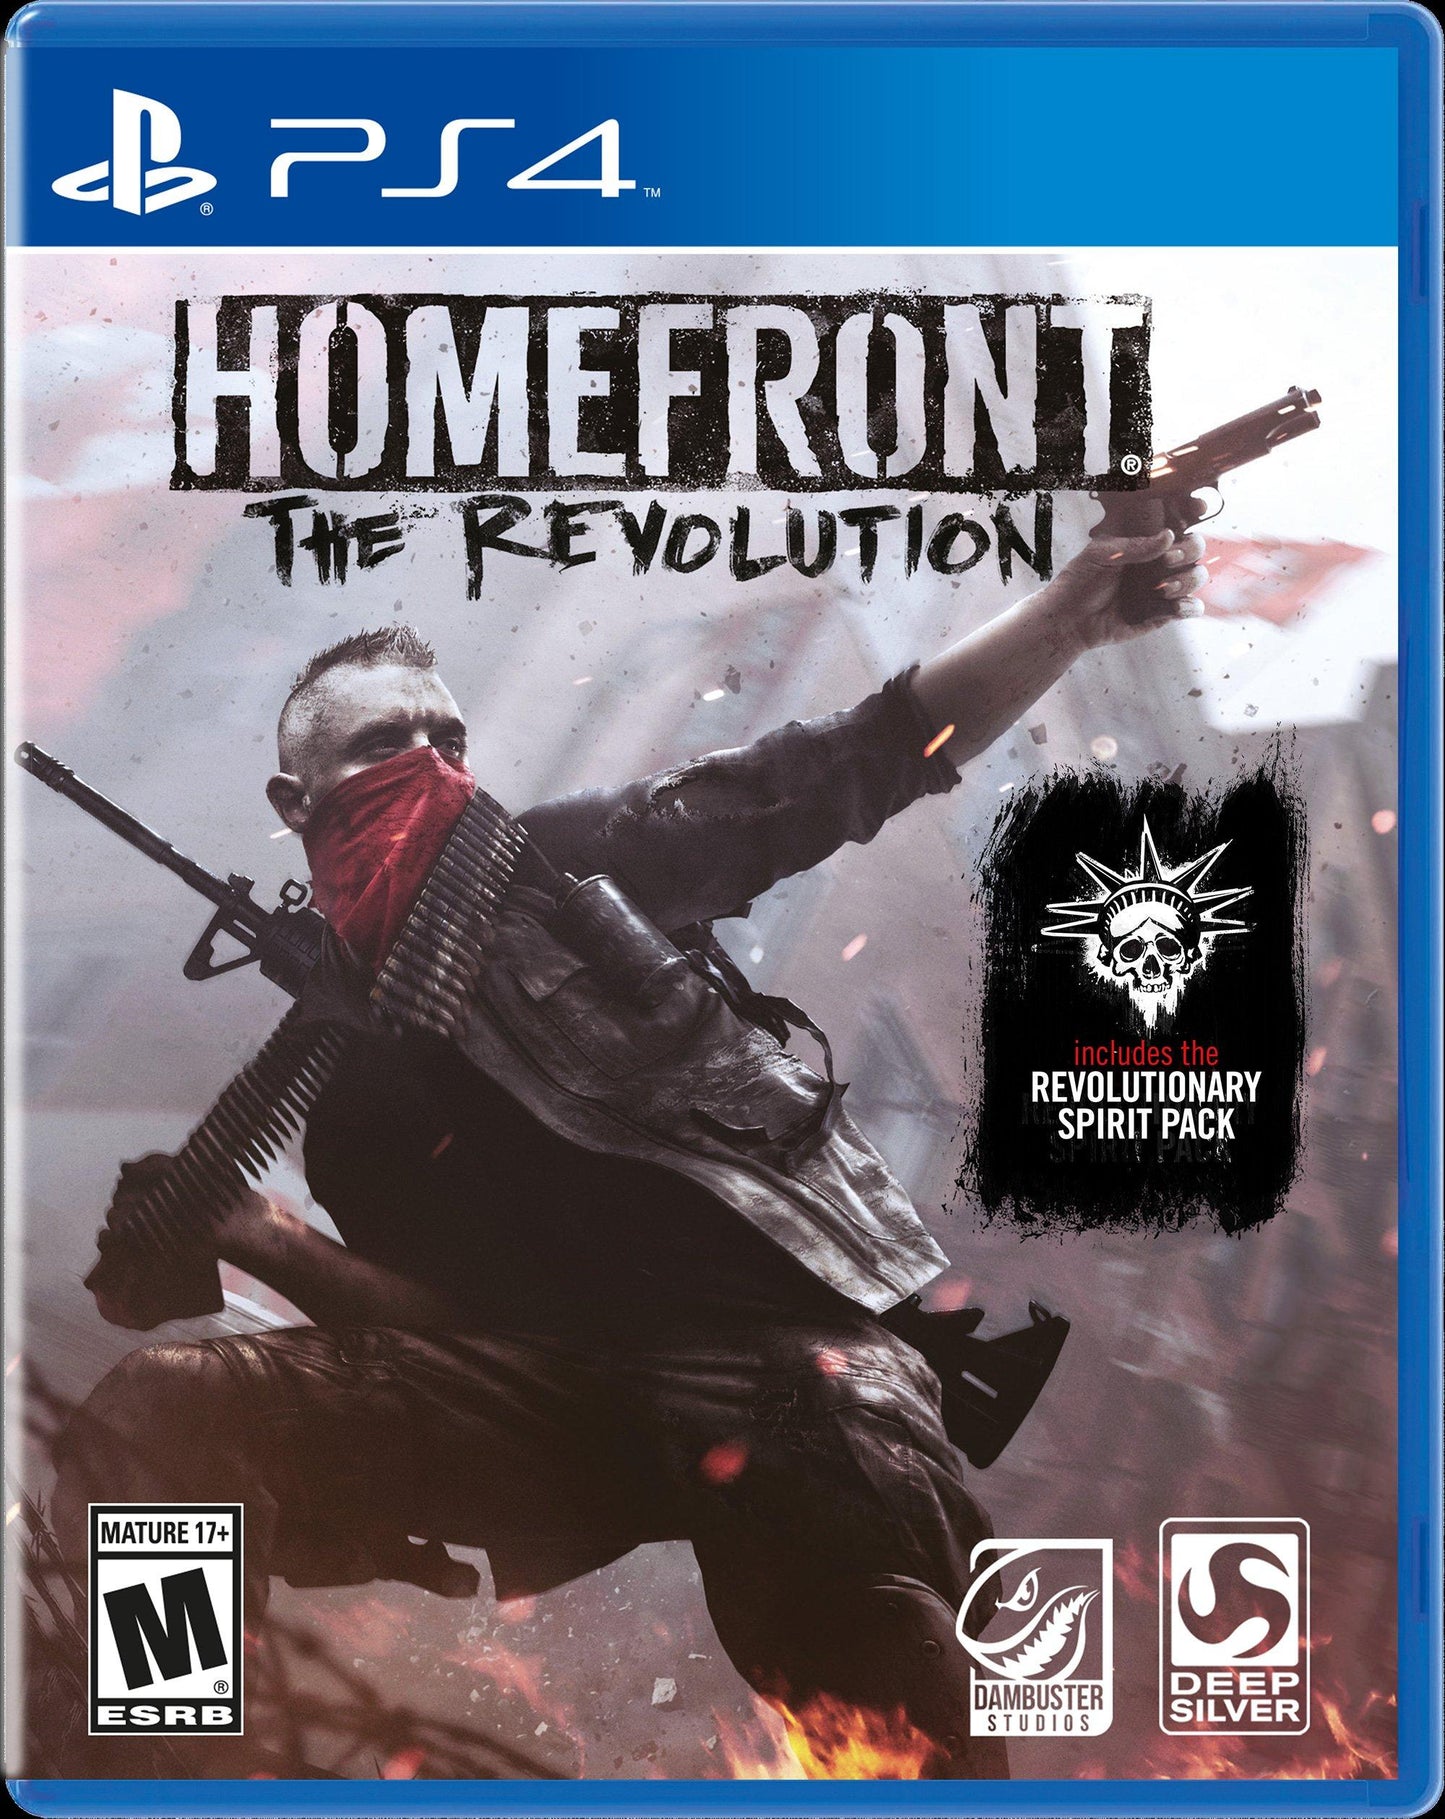 moe front the revolution ps4